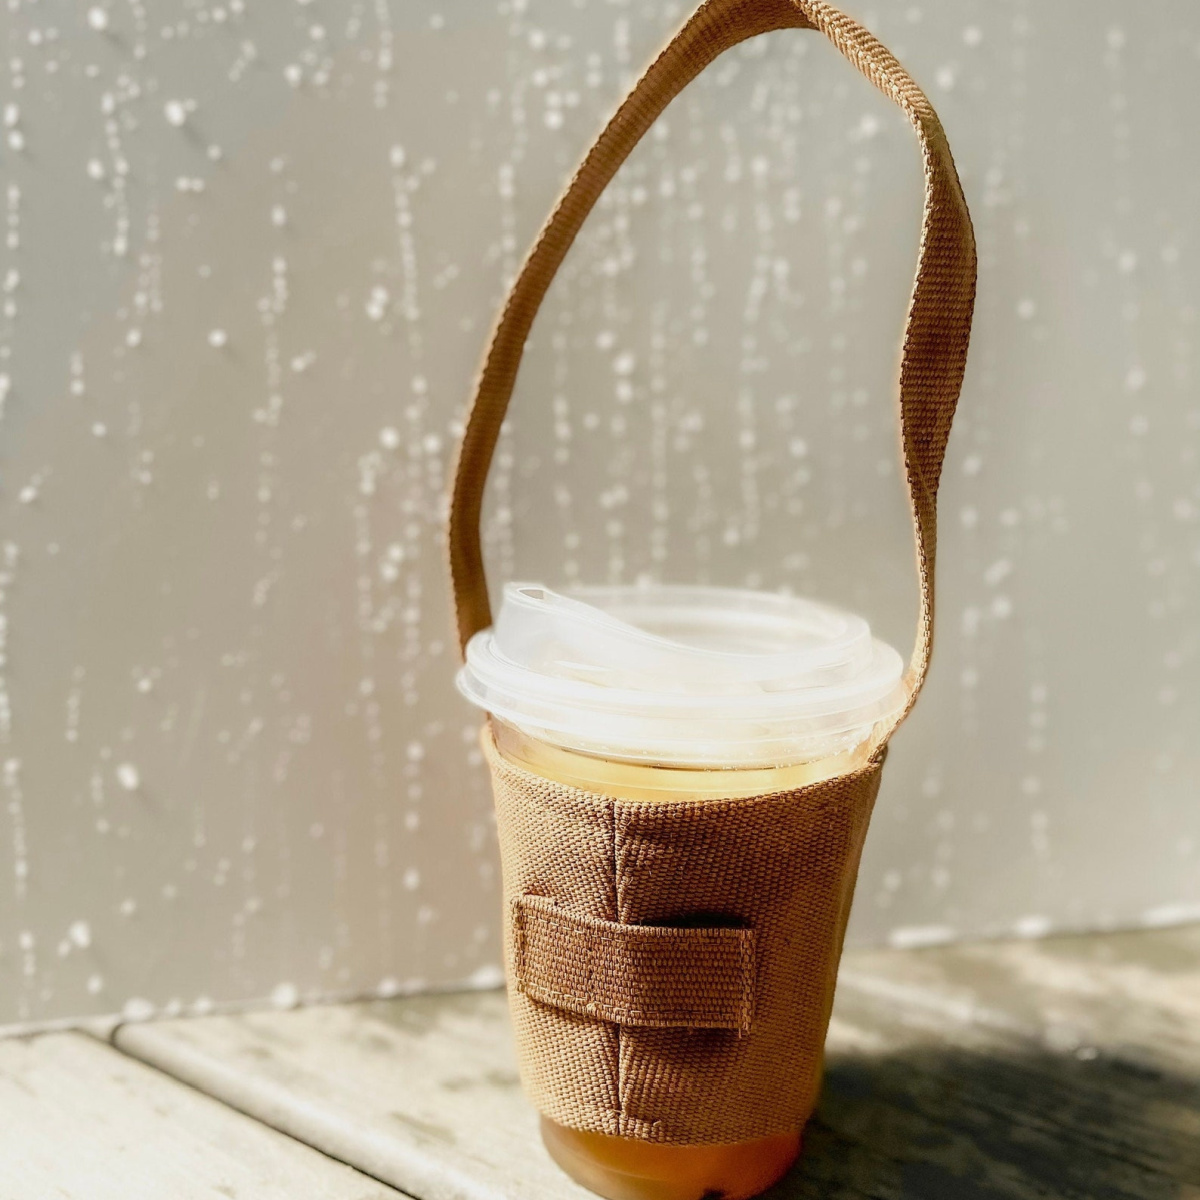 iced coffee holder cool things to buy on etsy